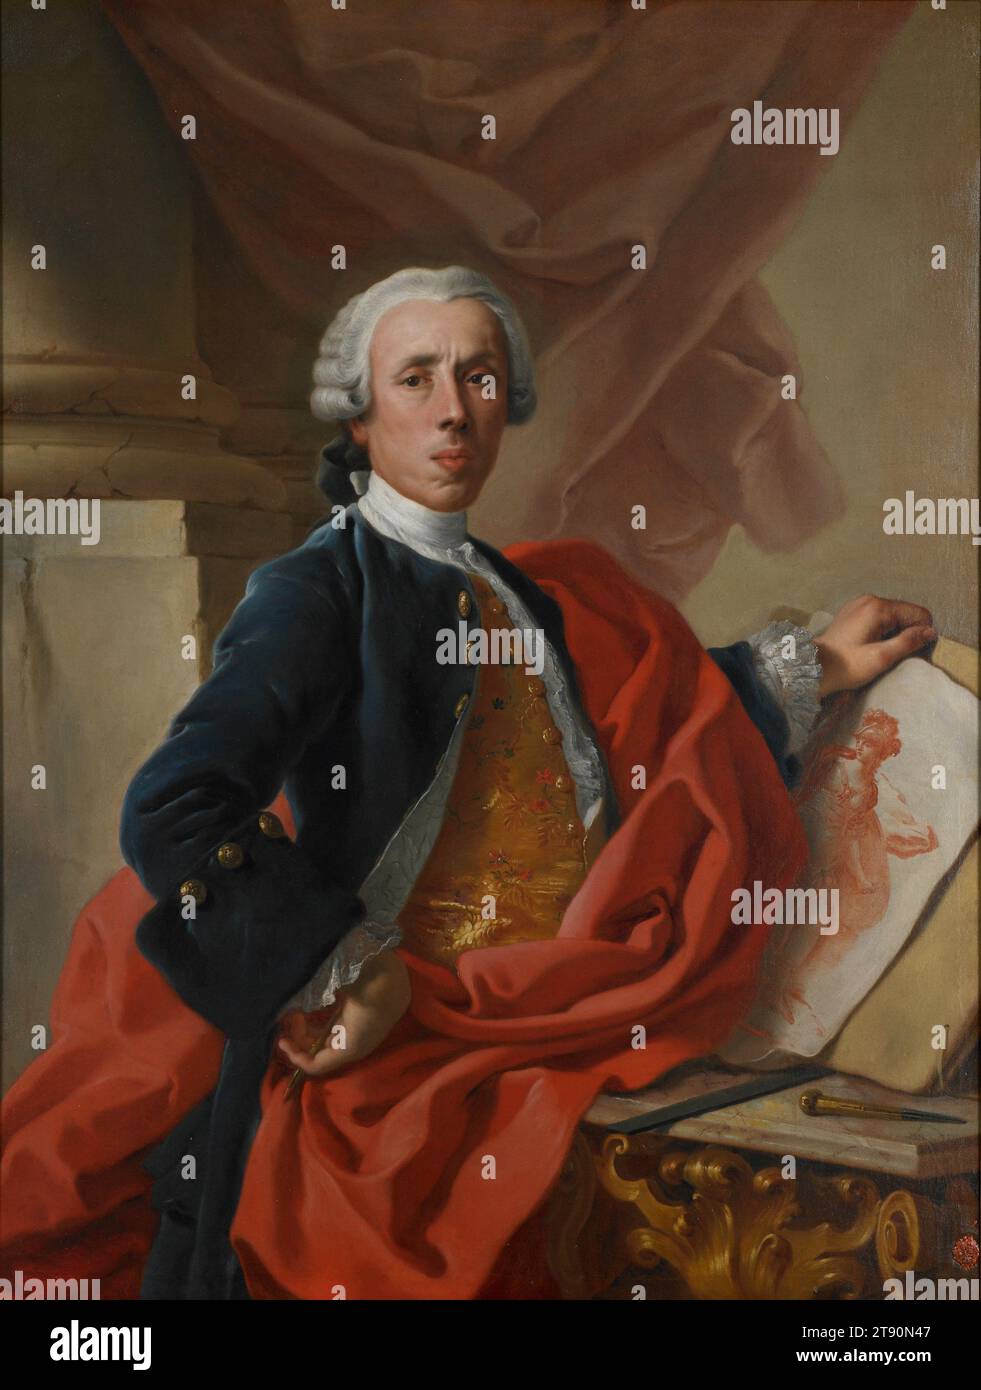 Self-Portrait, c. 1740, Francesco de Mura, Italian, (Naples), 1696–1782, 51 x 40 in. (129.54 x 101.6 cm) (canvas)50 x 38 in. (127 x 96.52 cm) (sight)59 3/4 × 48 7/8 in. (151.77 × 124.14 cm) (outer frame), Oil on canvas, Italy, 18th century, Francesco de Mura presents himself as a man of great elegance and high social standing. He is sumptuously dressed and surrounded by trappings of wealth and grandeur (billowing drapery, monumental column, marble-topped gilt table). His drawing tools are prominently displayed. Traditionally, the medium of drawing reveals the intellectual quality Stock Photo